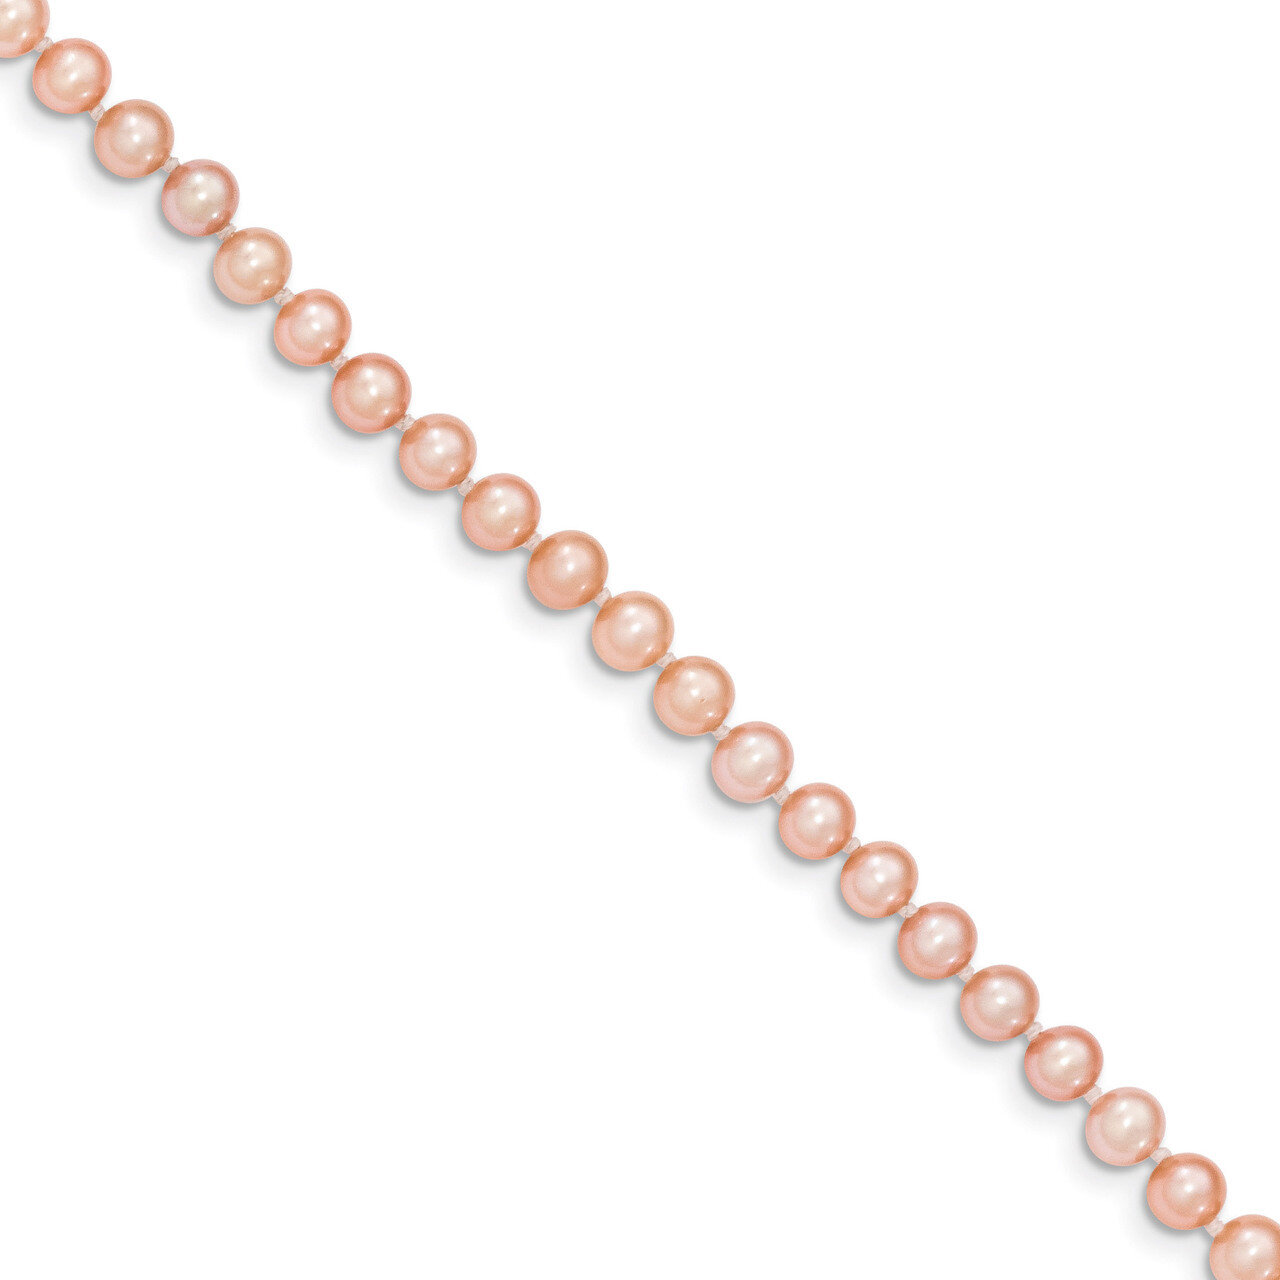 4-5mm Pink Cultured Near Round Pearl Necklace 16 Inch 14k Gold PPN040-16